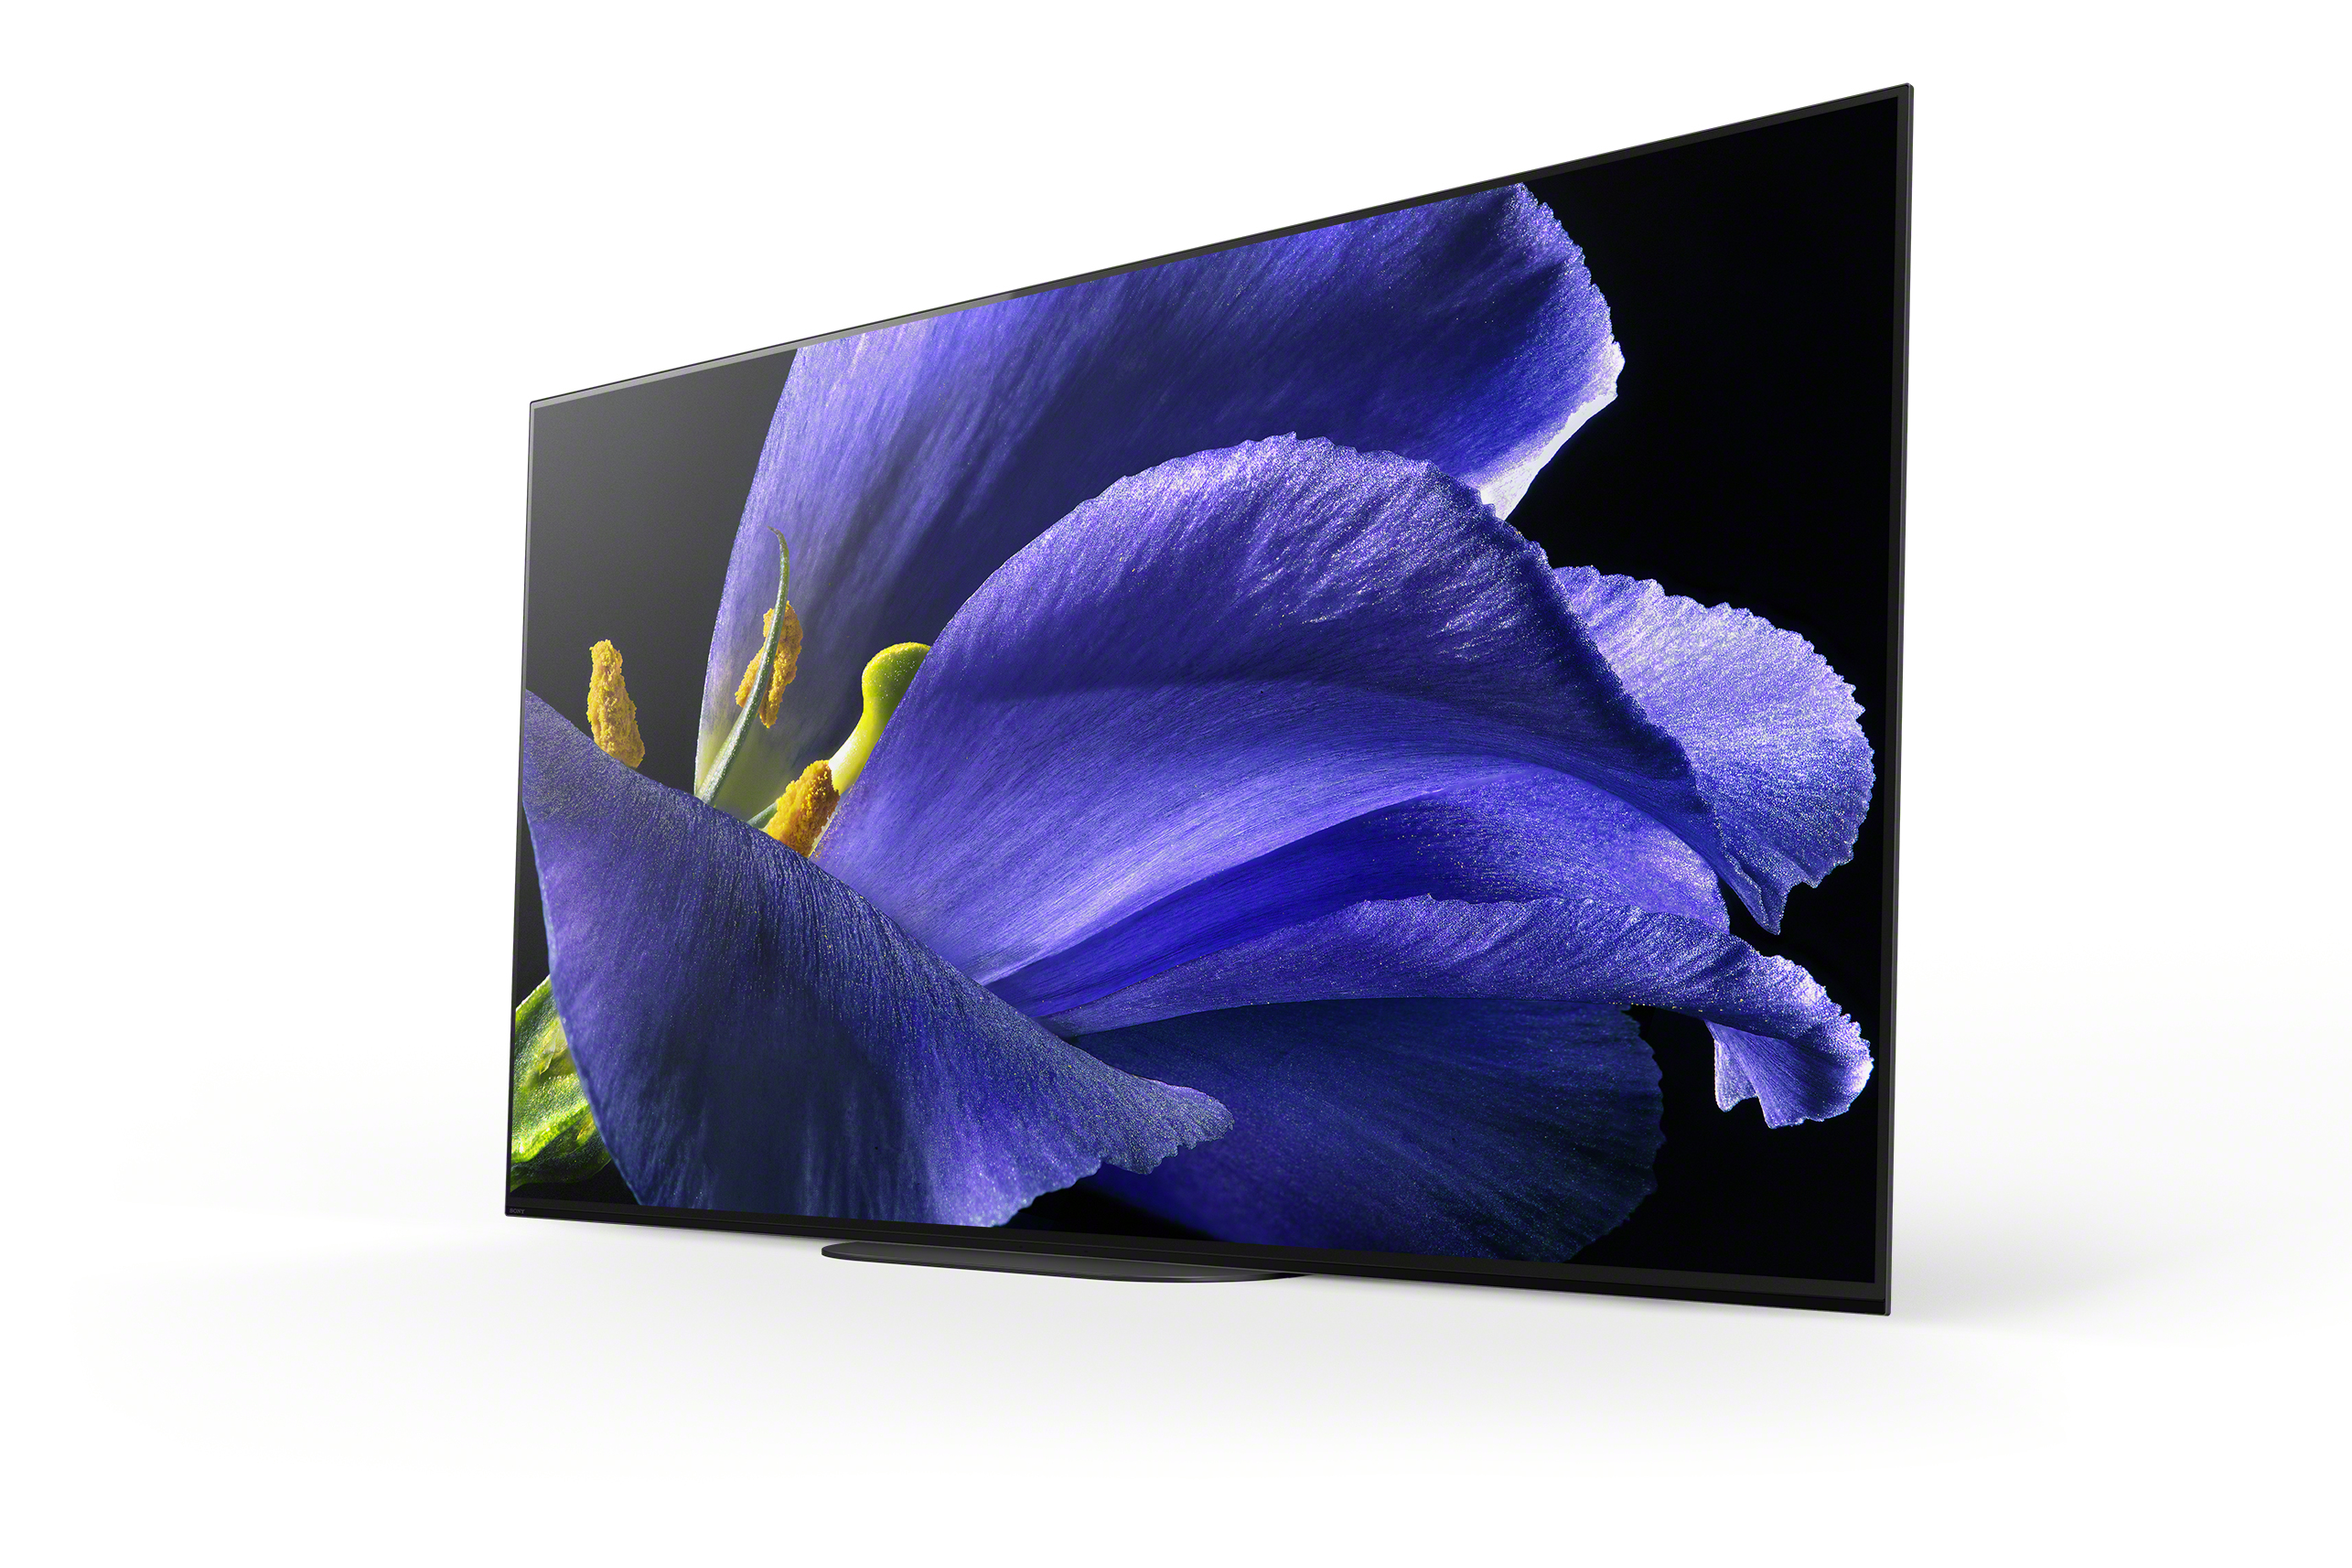 Sony 55" Class XBR55A9G 4K UHD OLED Android Smart TV HDR BRAVIA A9G Series - image 14 of 24